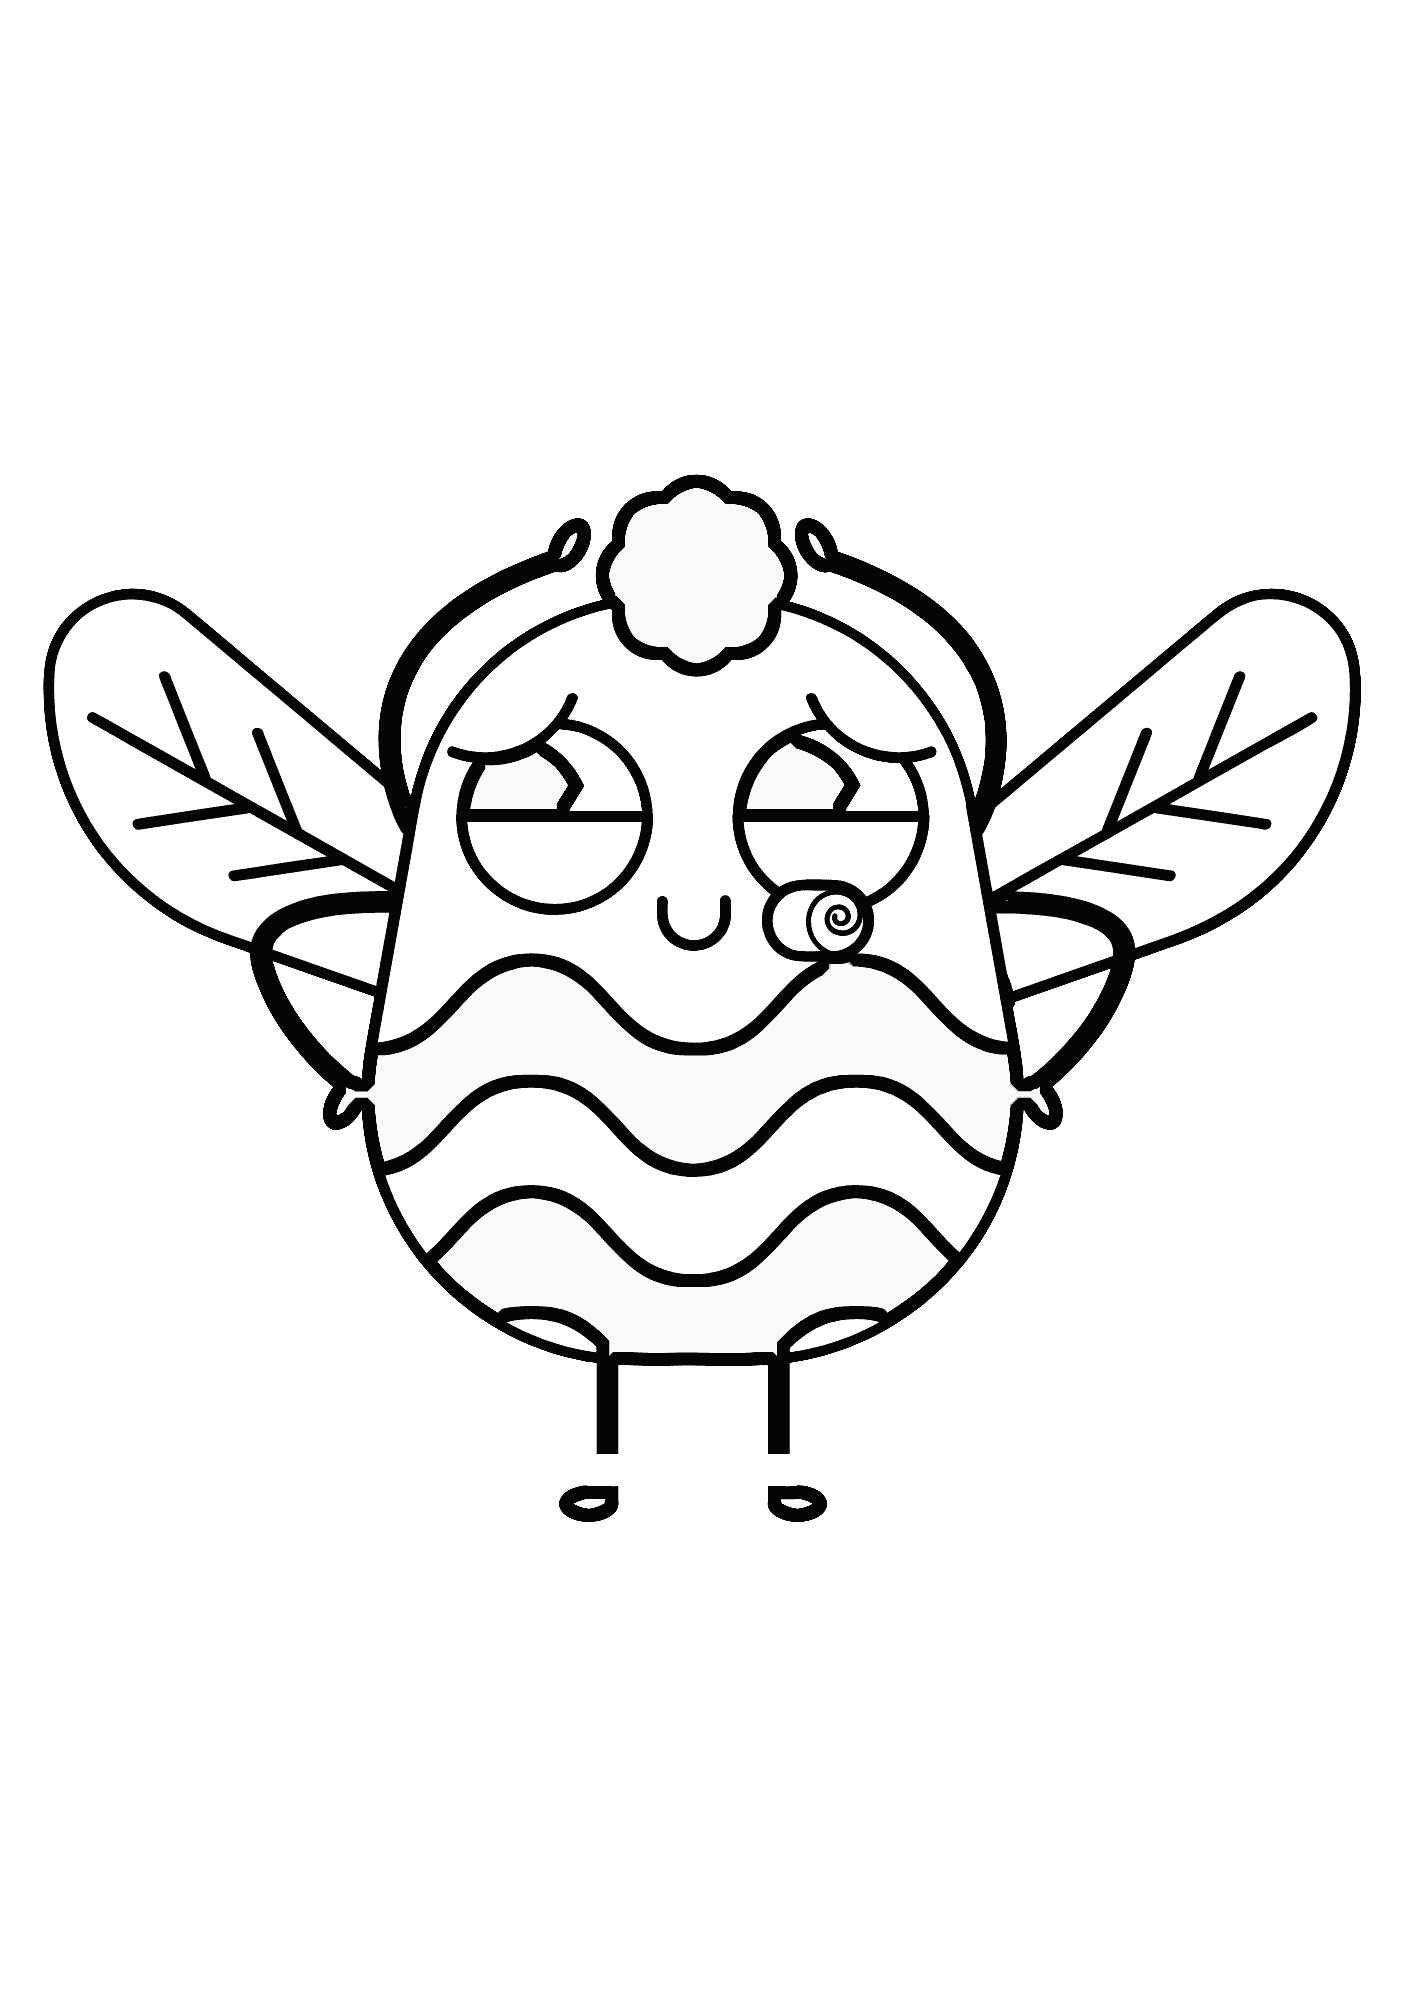 Bee Printable For Kids Coloring Page